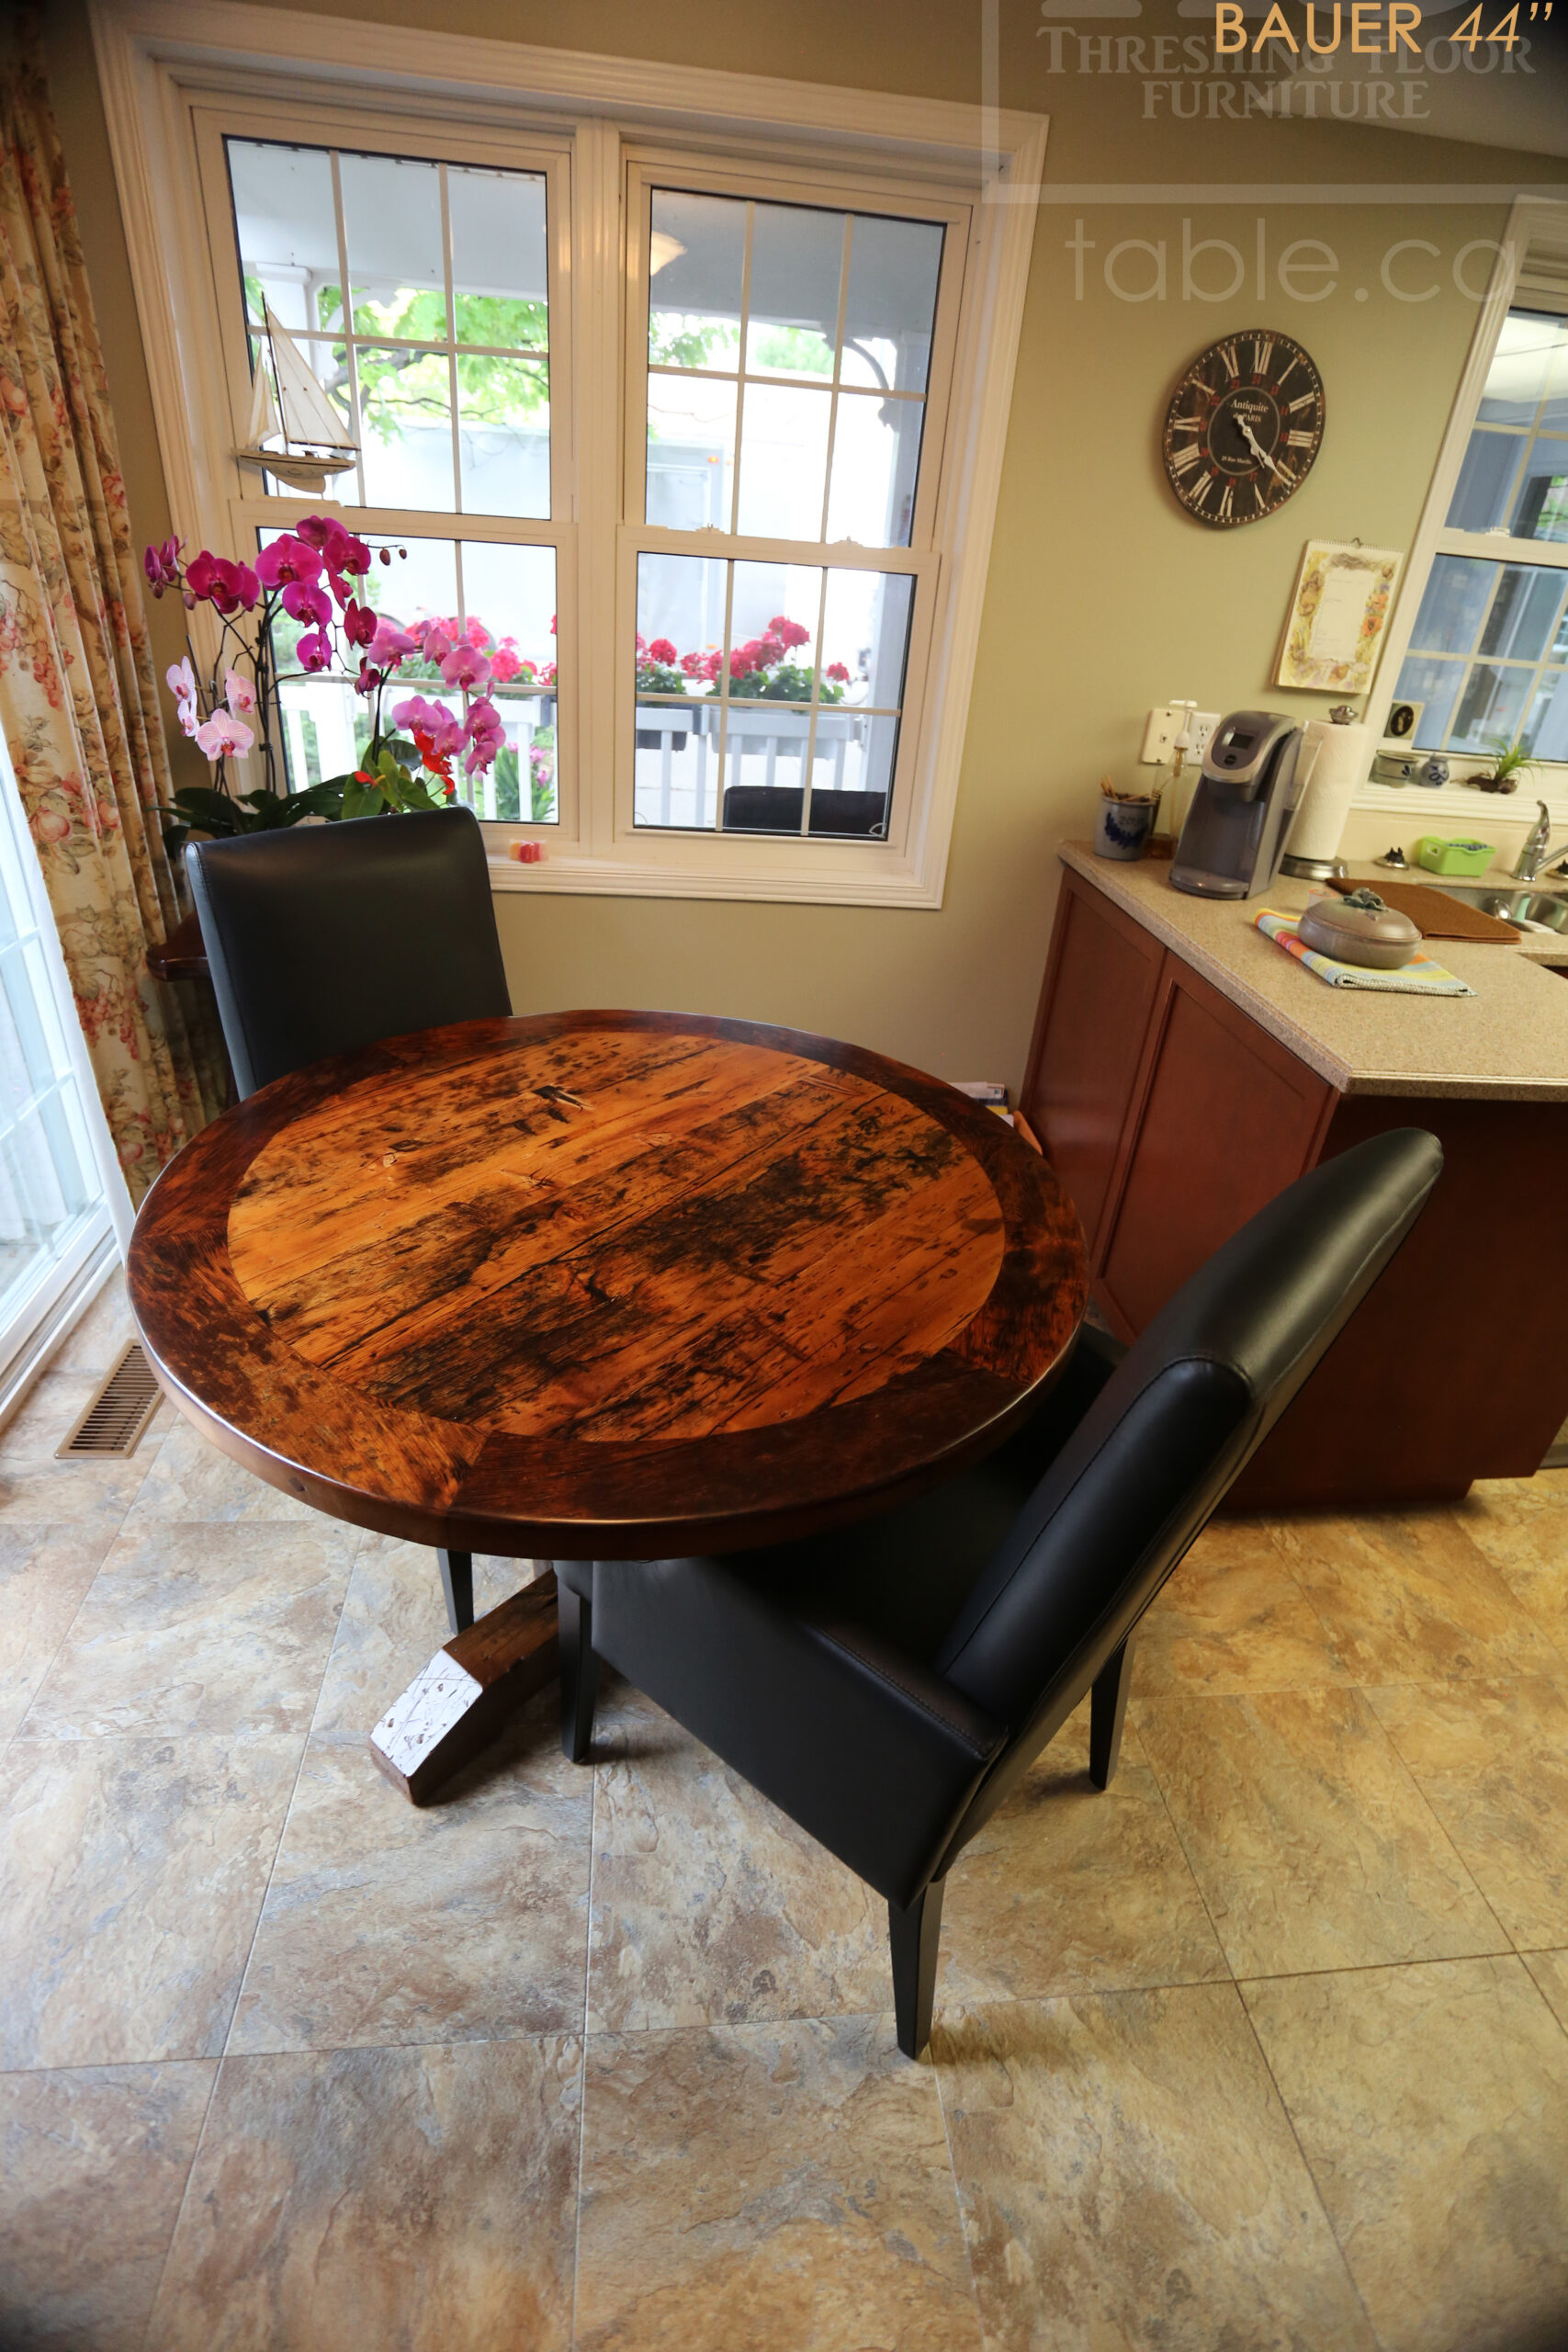 Project details: 44” Reclaimed Ontario Barnwood Round Table we made for a Waterloo, Ontario home – Pedestal Base - Old Growth Hemlock Threshing Floor Construction – Original edges & distressing maintained – Circular Bread Edges - Premium epoxy + satin polyurethane finish - www.table.ca